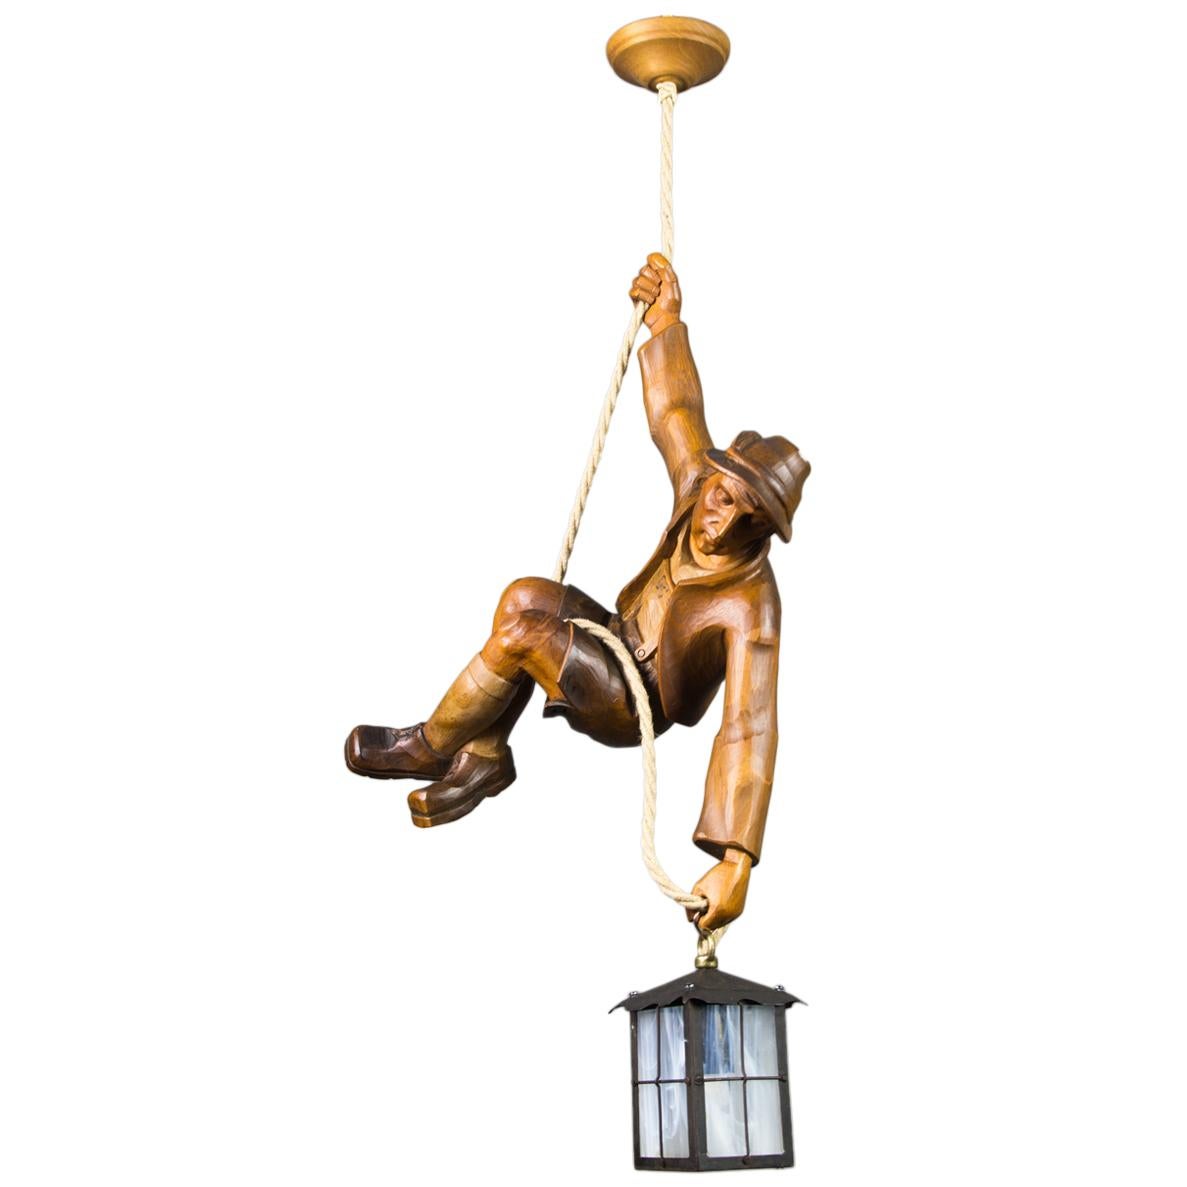 Figural Pendant Light of a Hand Carved Wood Figure Mountain Climber with Lantern